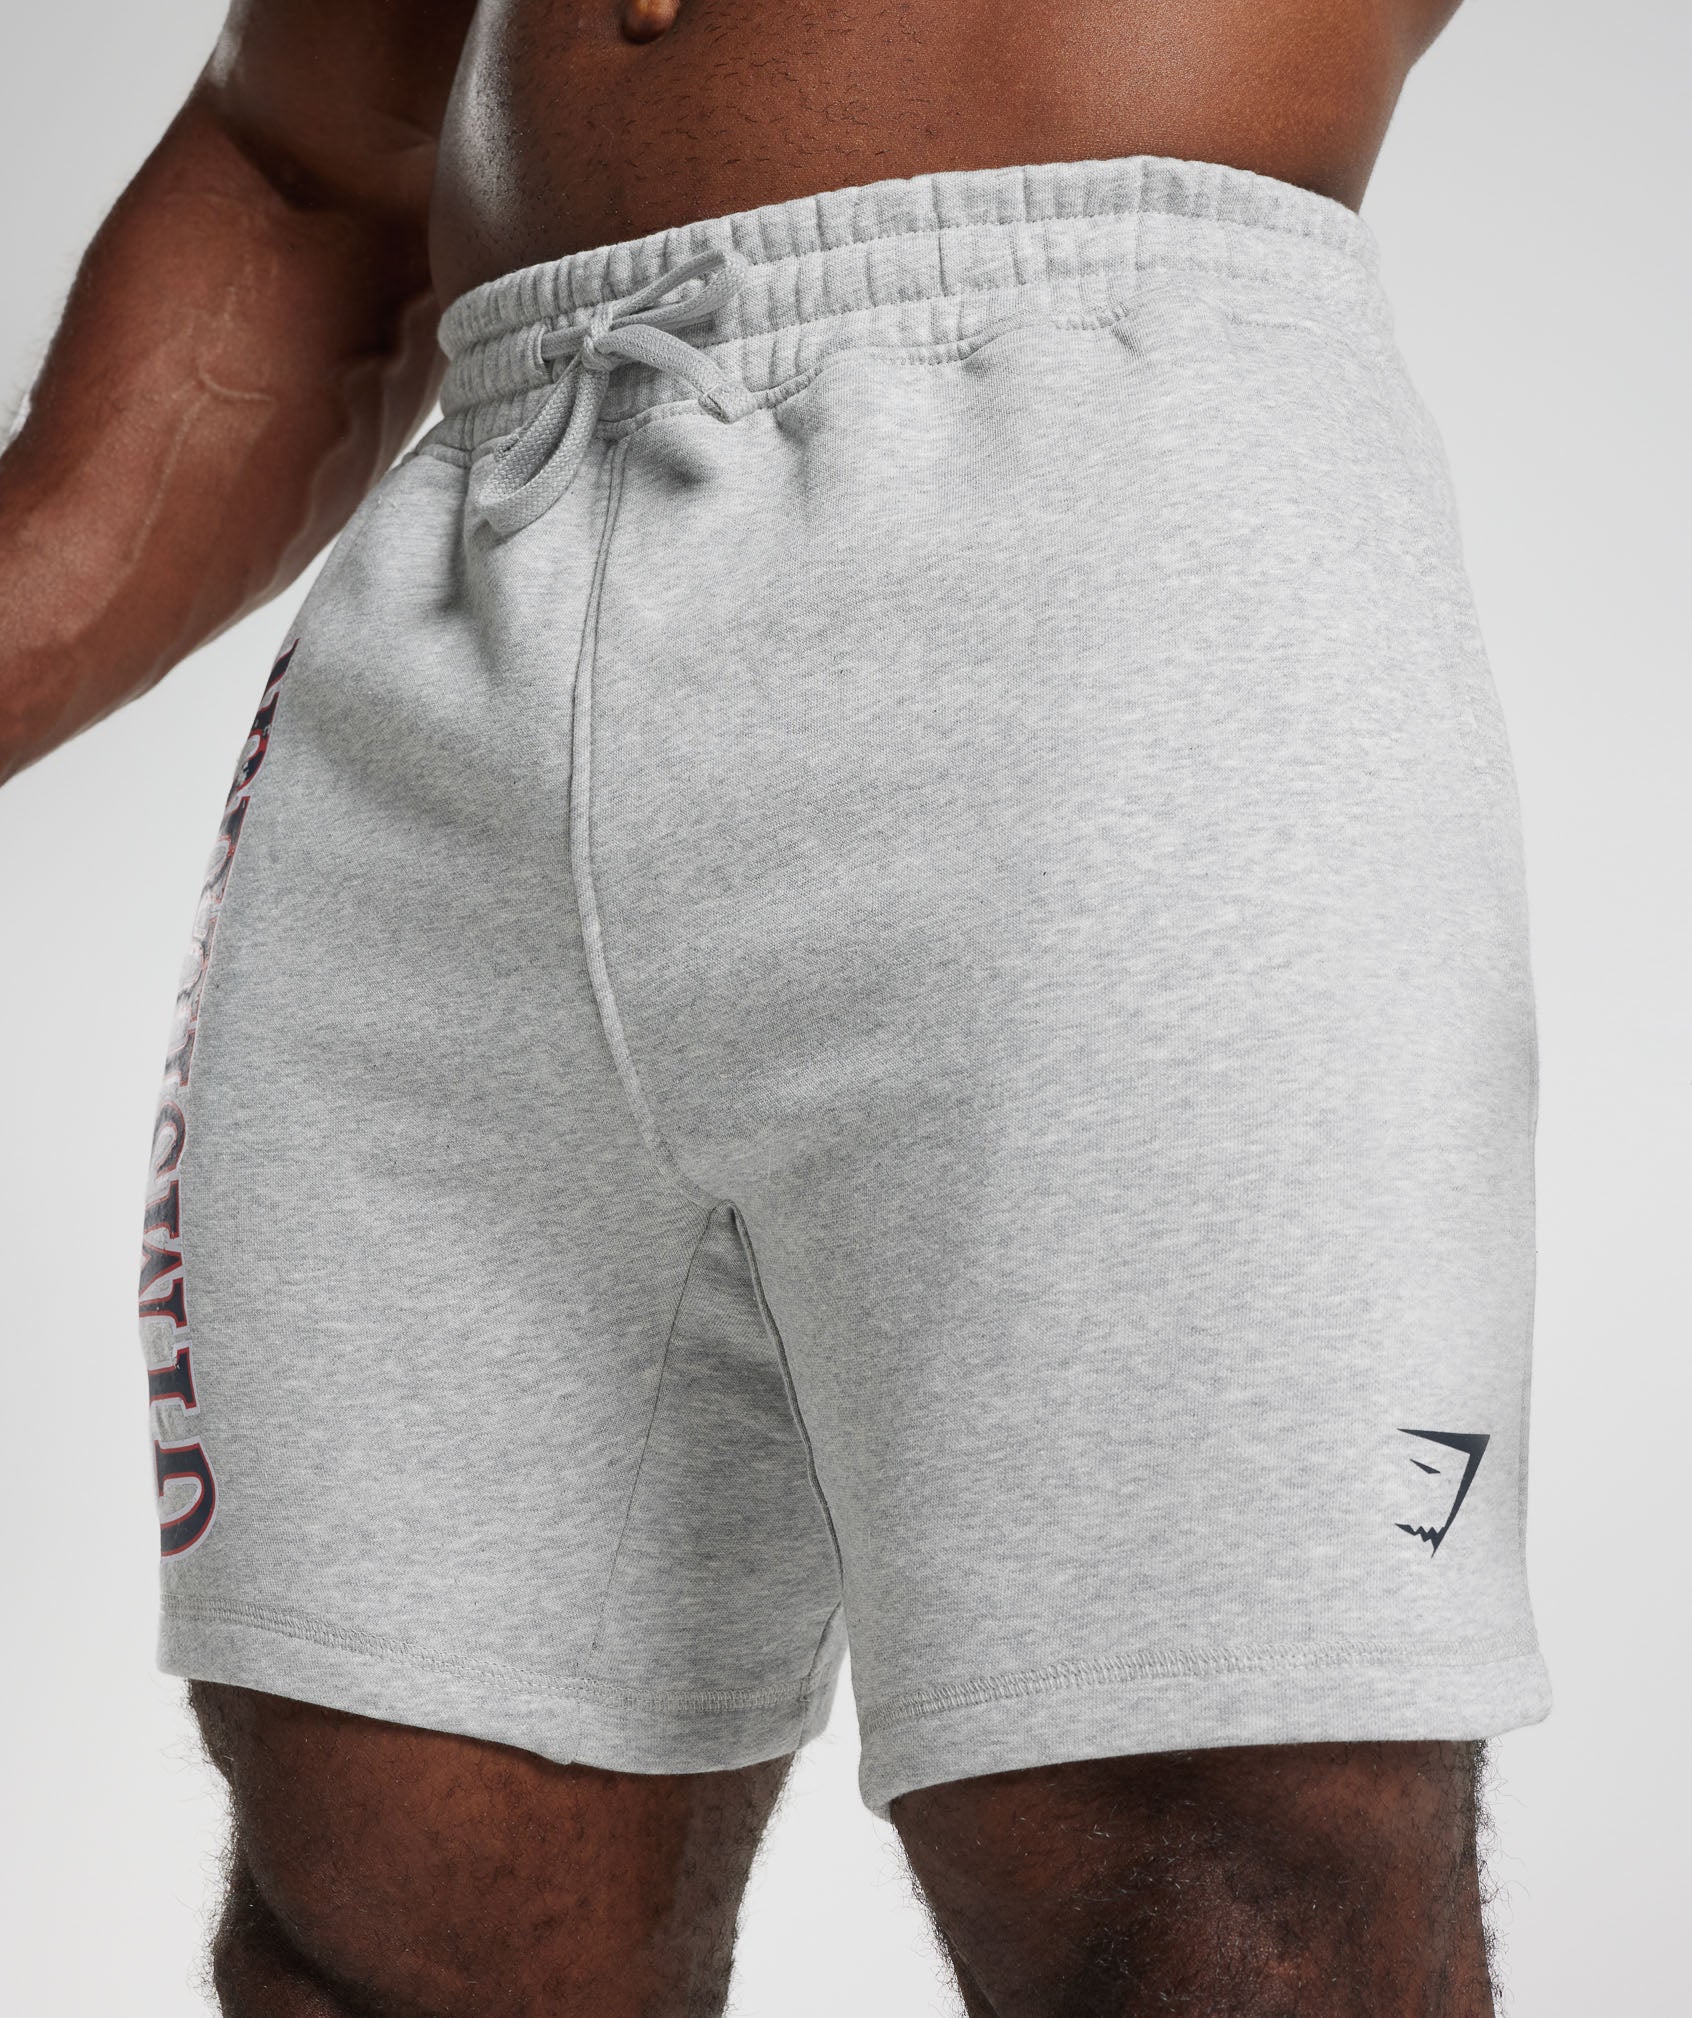 Retrowave Shorts in Light Grey Core Marl - view 6